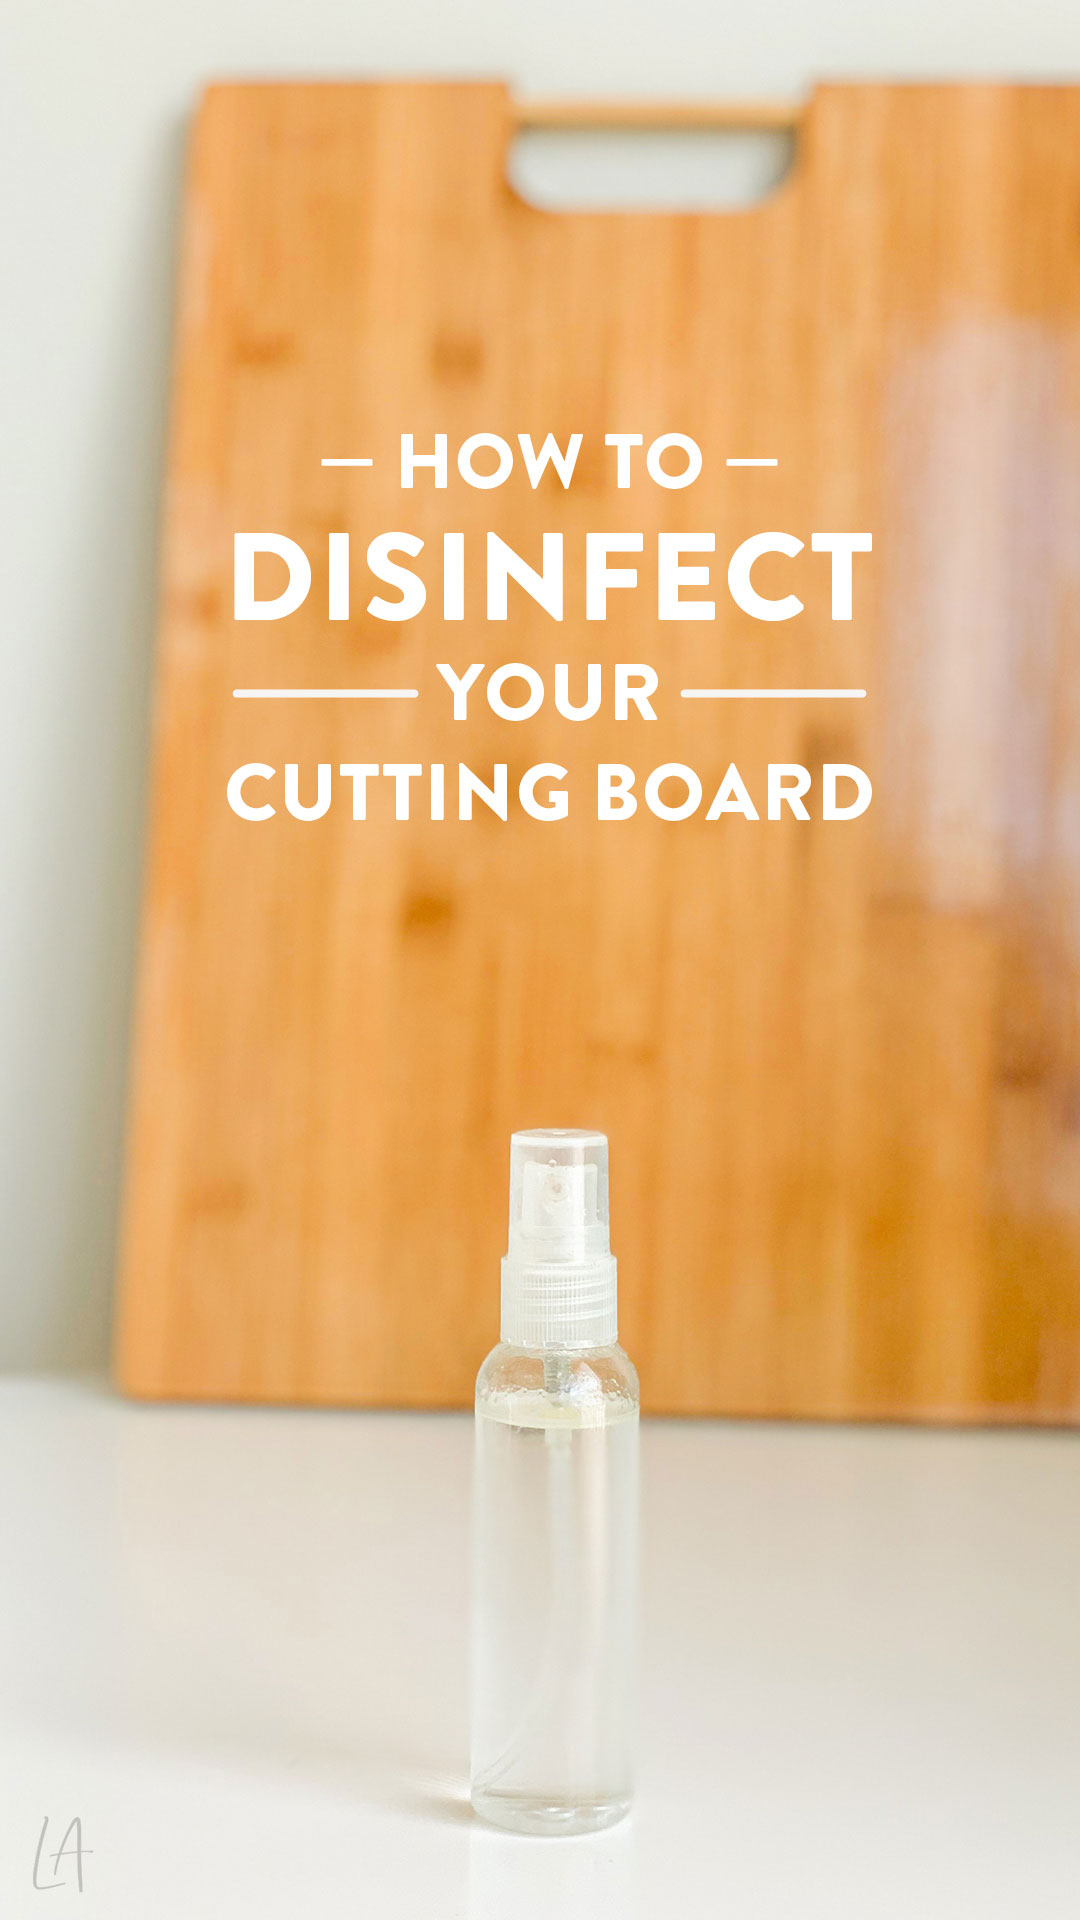 How to disinfect your cutting board